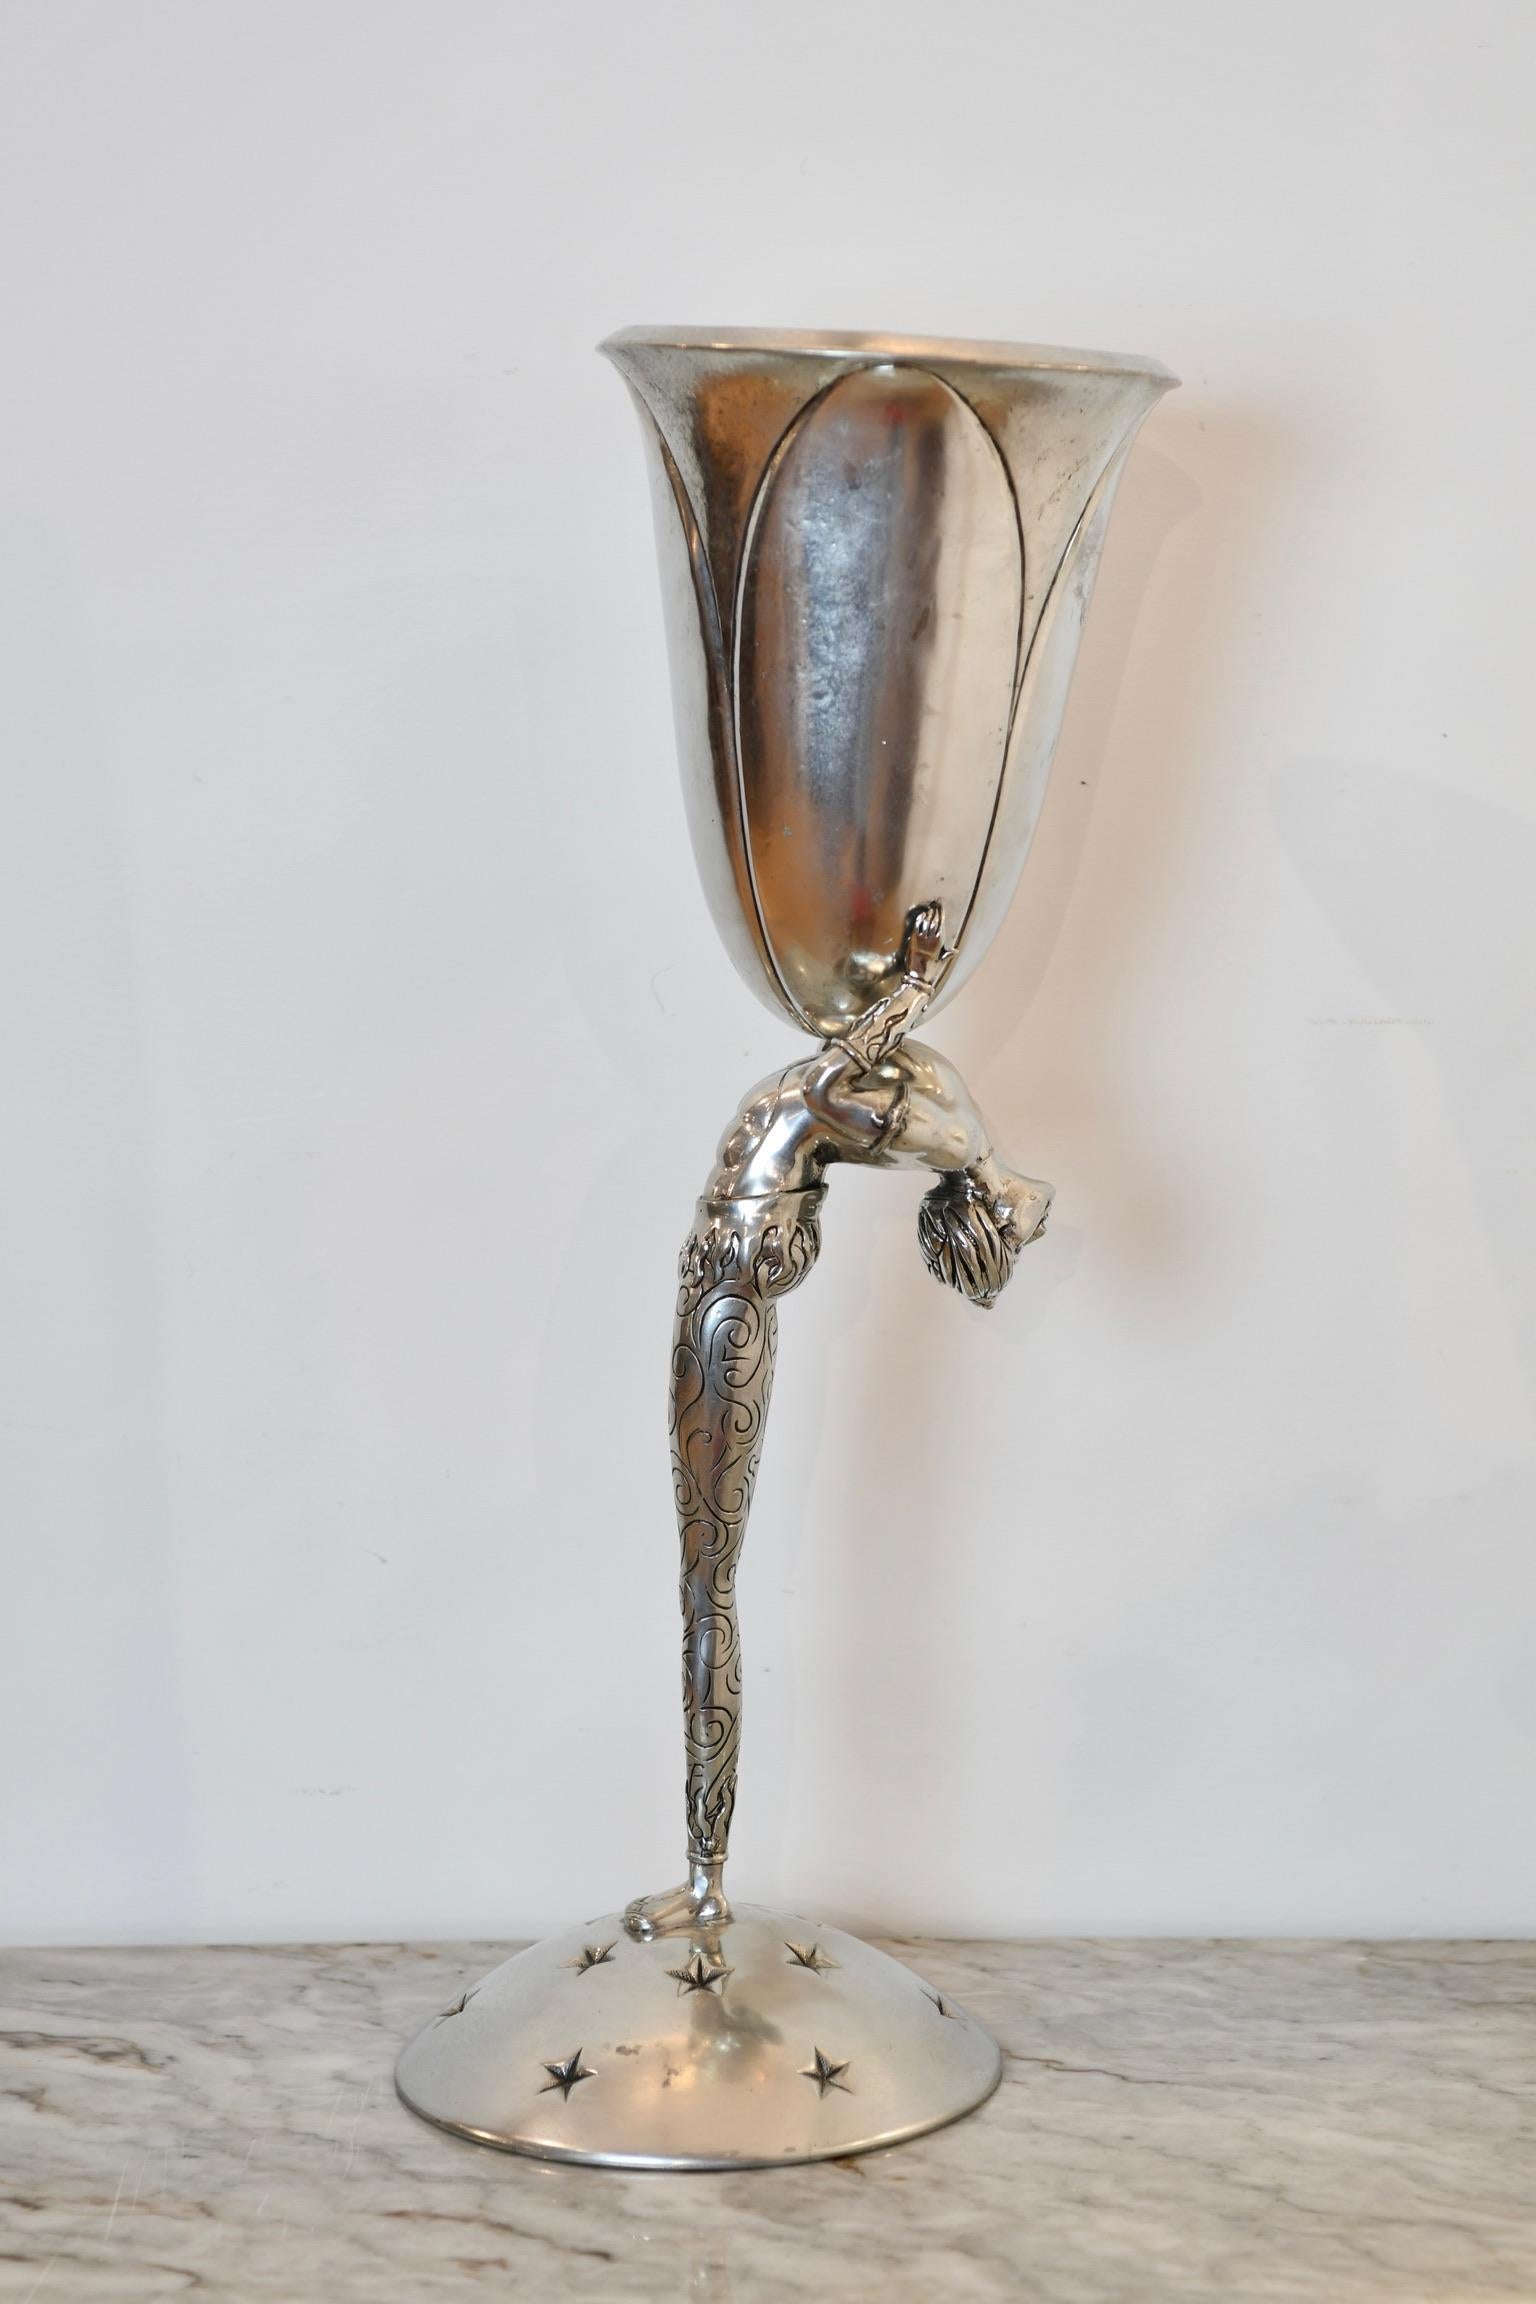 Pewter vase with acrobat arched back holding centerpiece vase and on star accented domed base. Marked to base Piero Figura for Atena, Milan. Dimensions: 24.5